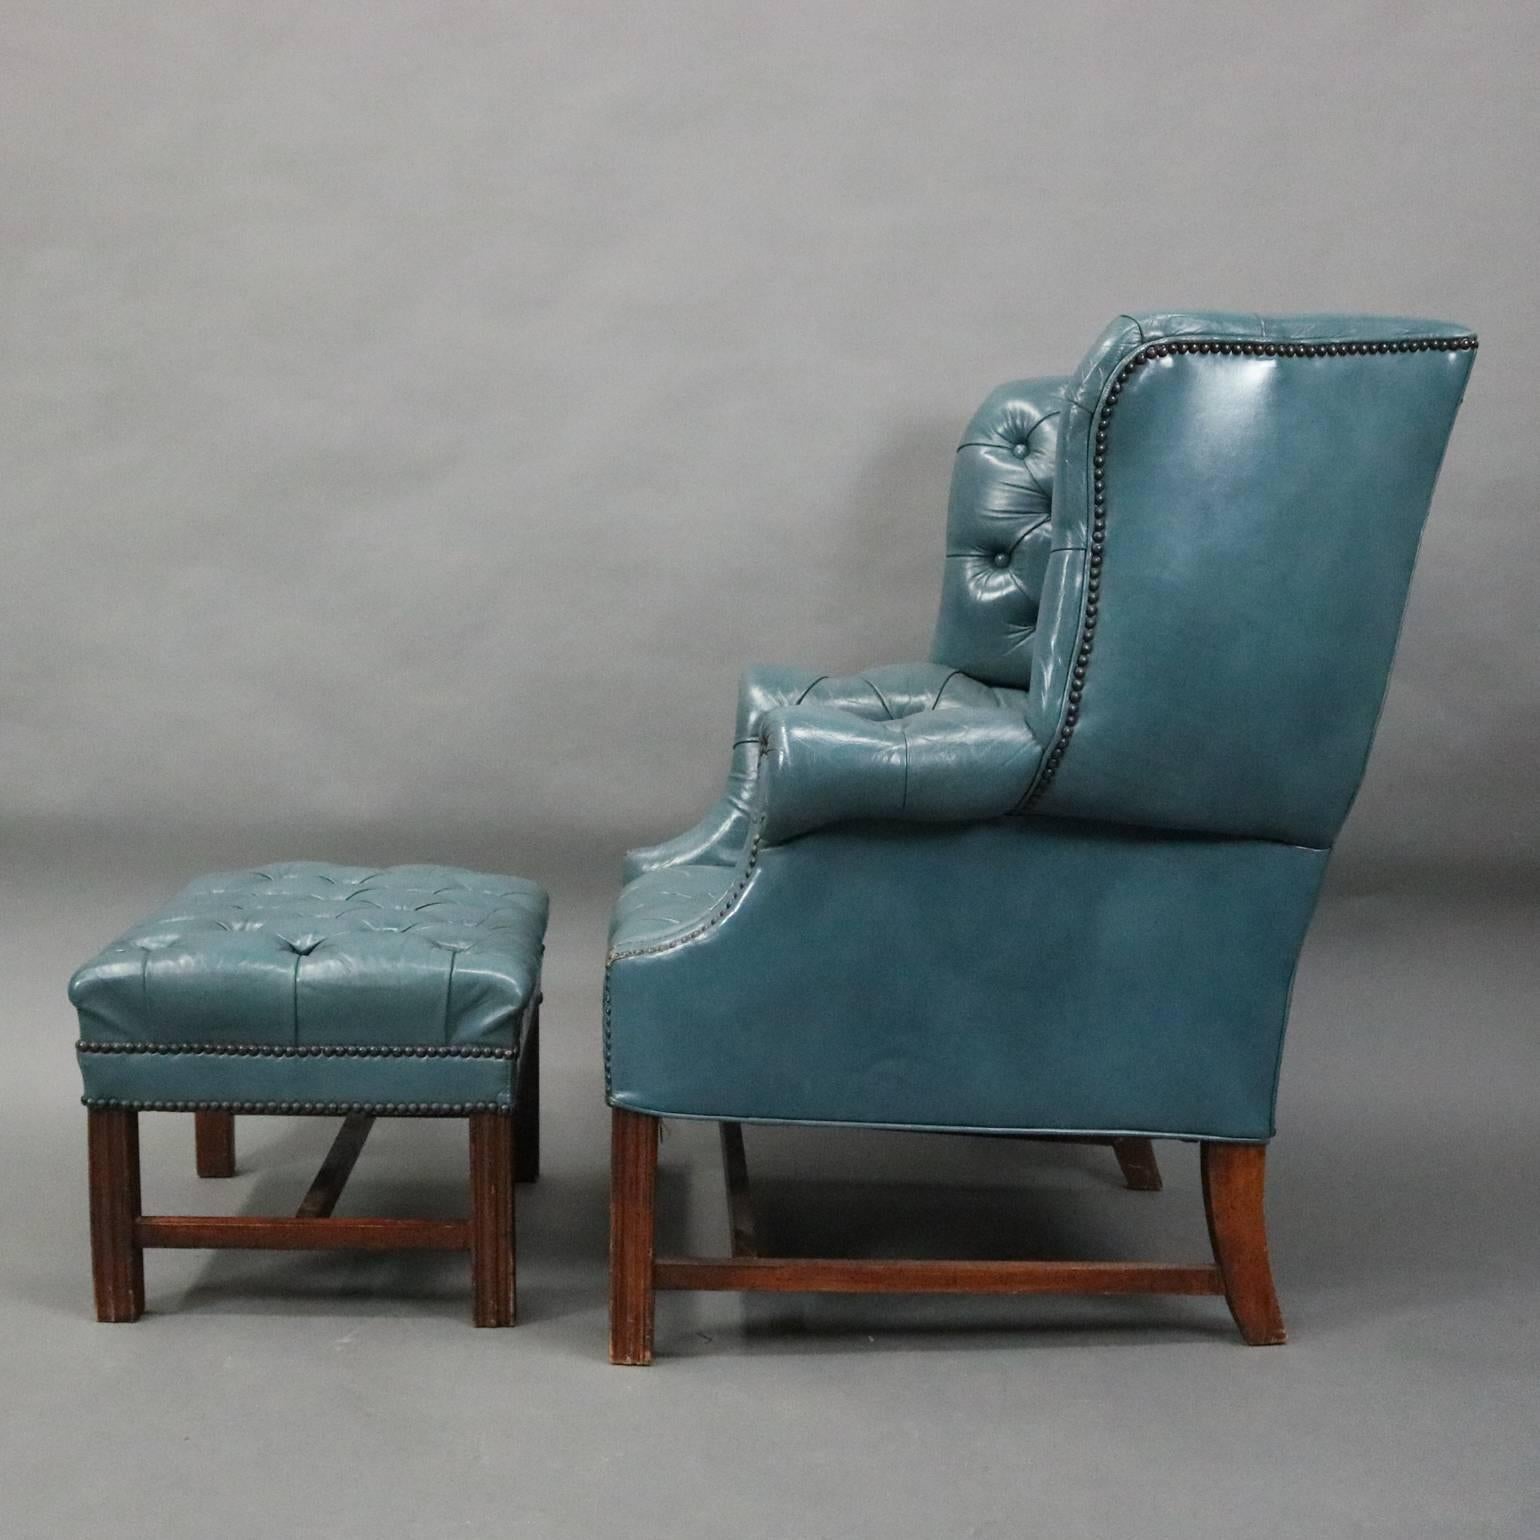 English Hepplewhite Style Leather Chesterfield Wingback Chair and Ottoman, circa 1960